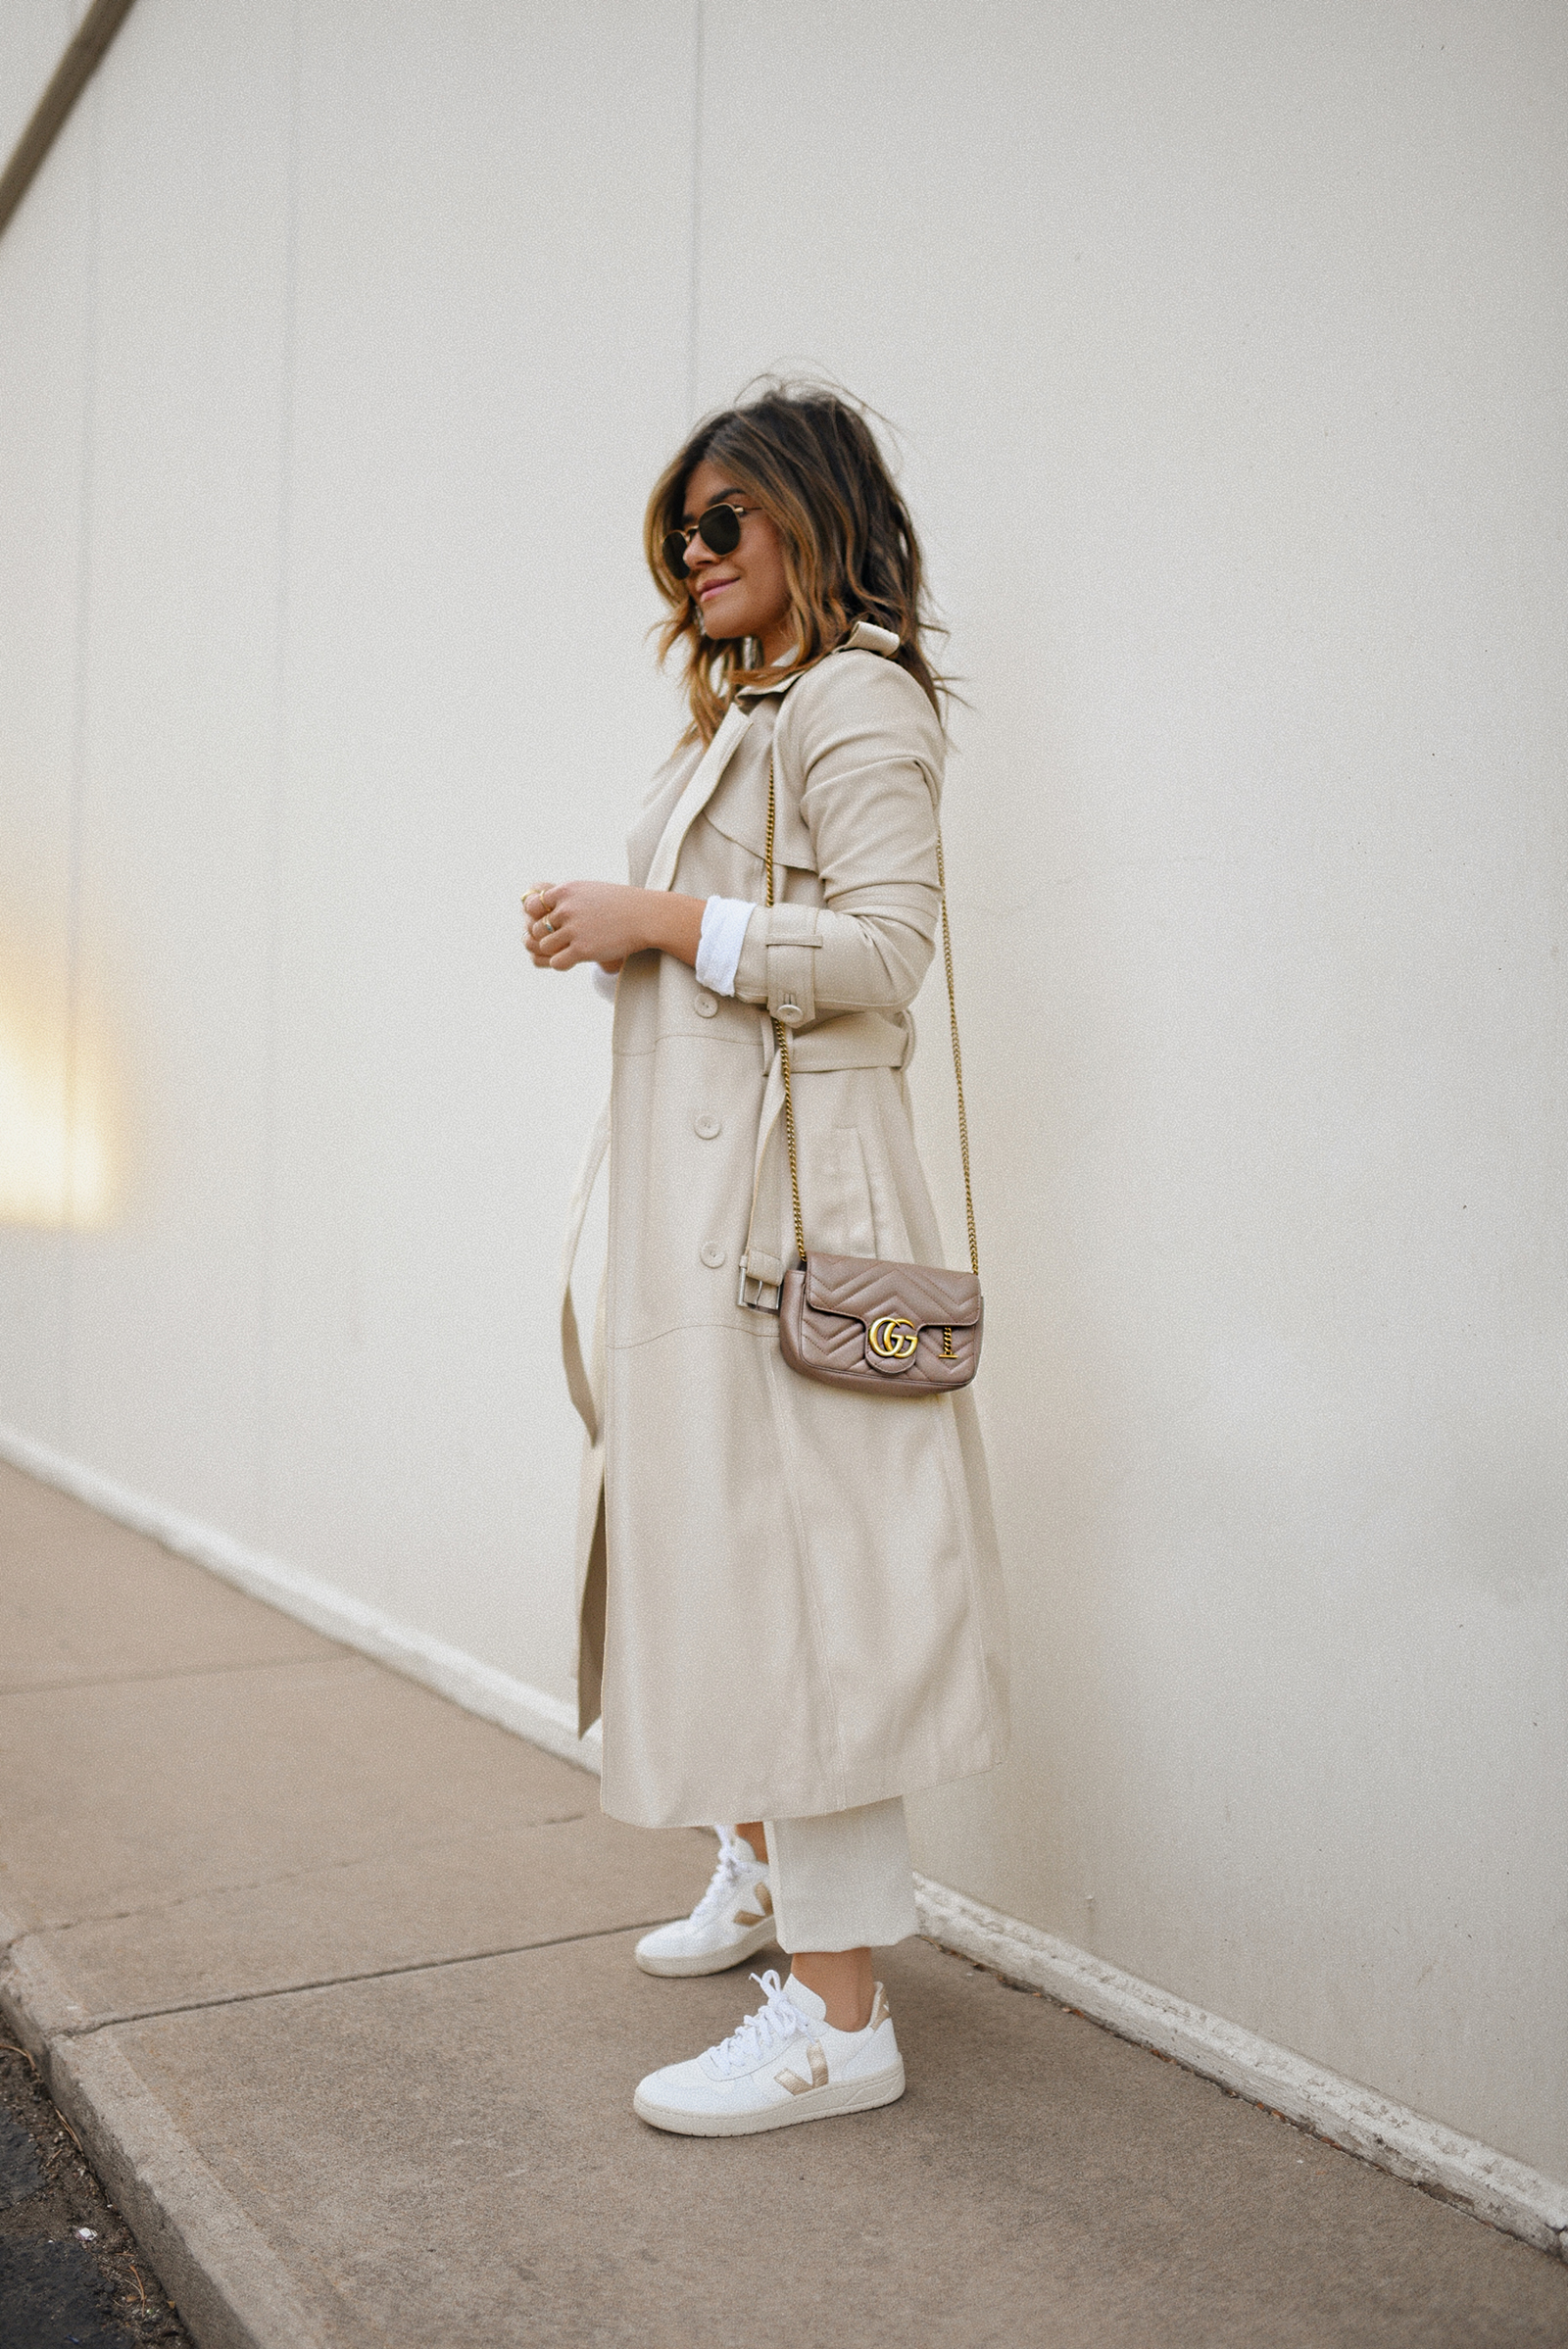 WINTER'S CHECKLIST: THE FAUX LEATHER TRENCH COAT, CHIC TALK